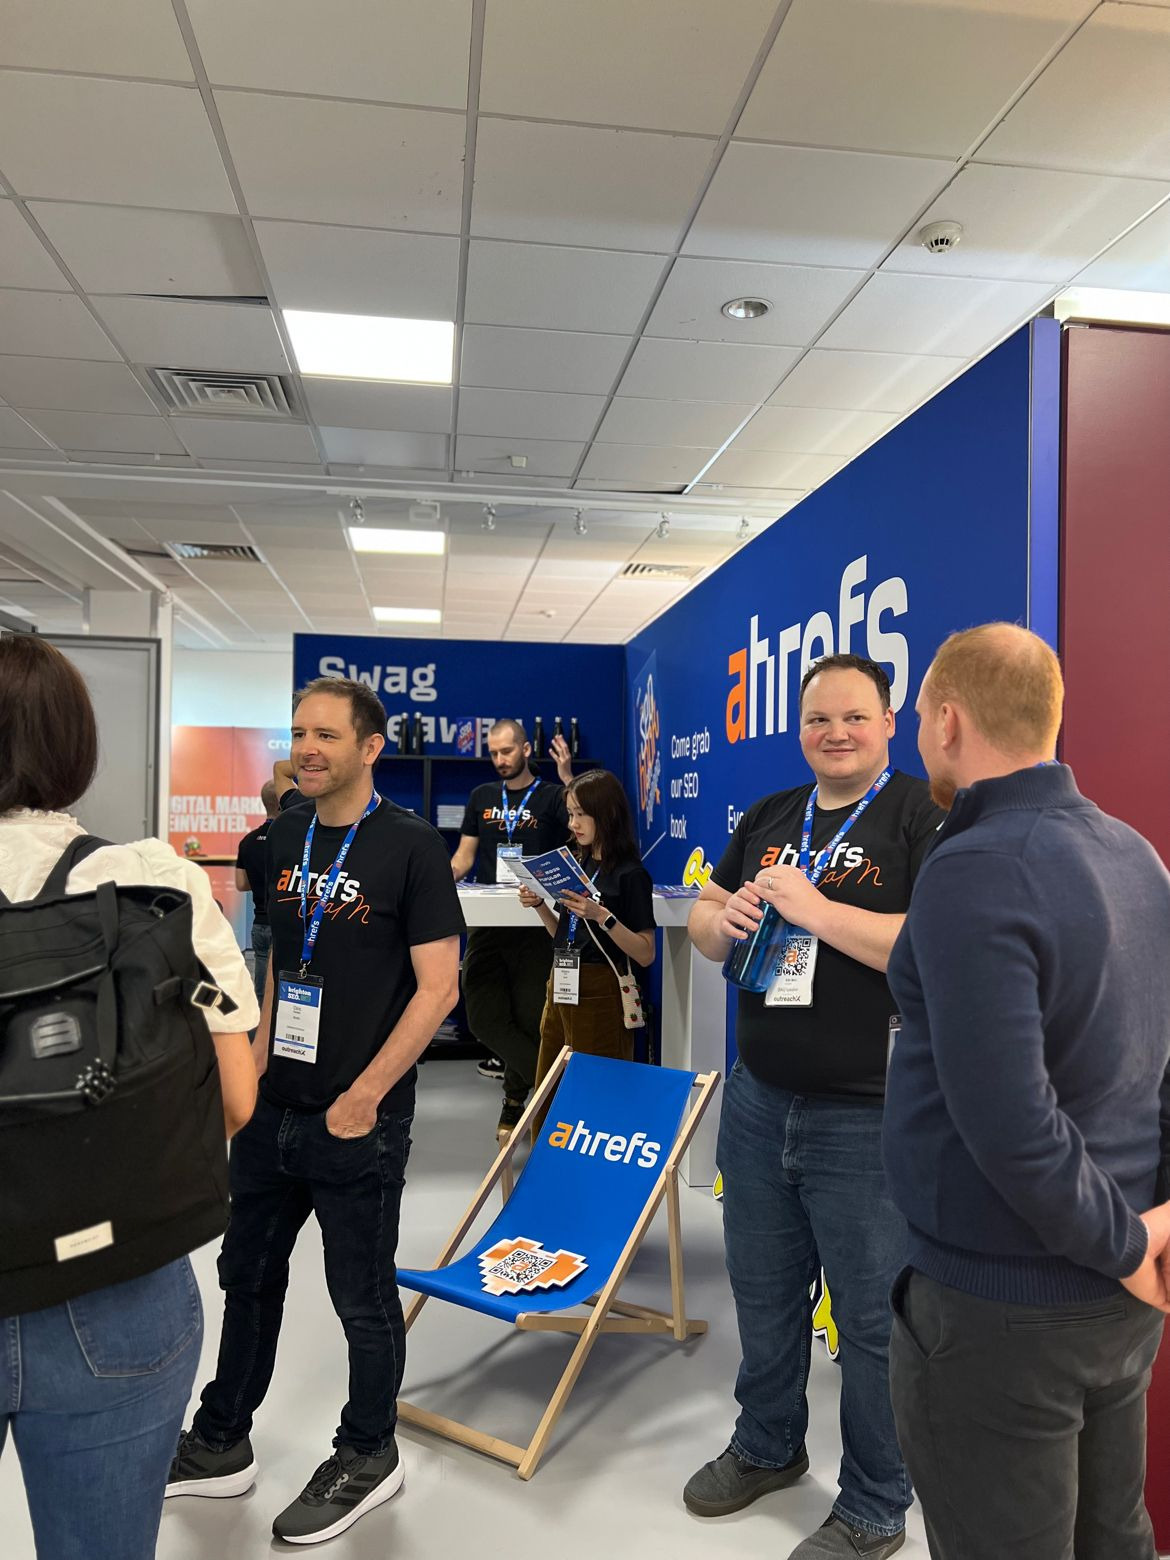 Patrick Stox and Chris Haines talking to customers about Ahrefs
